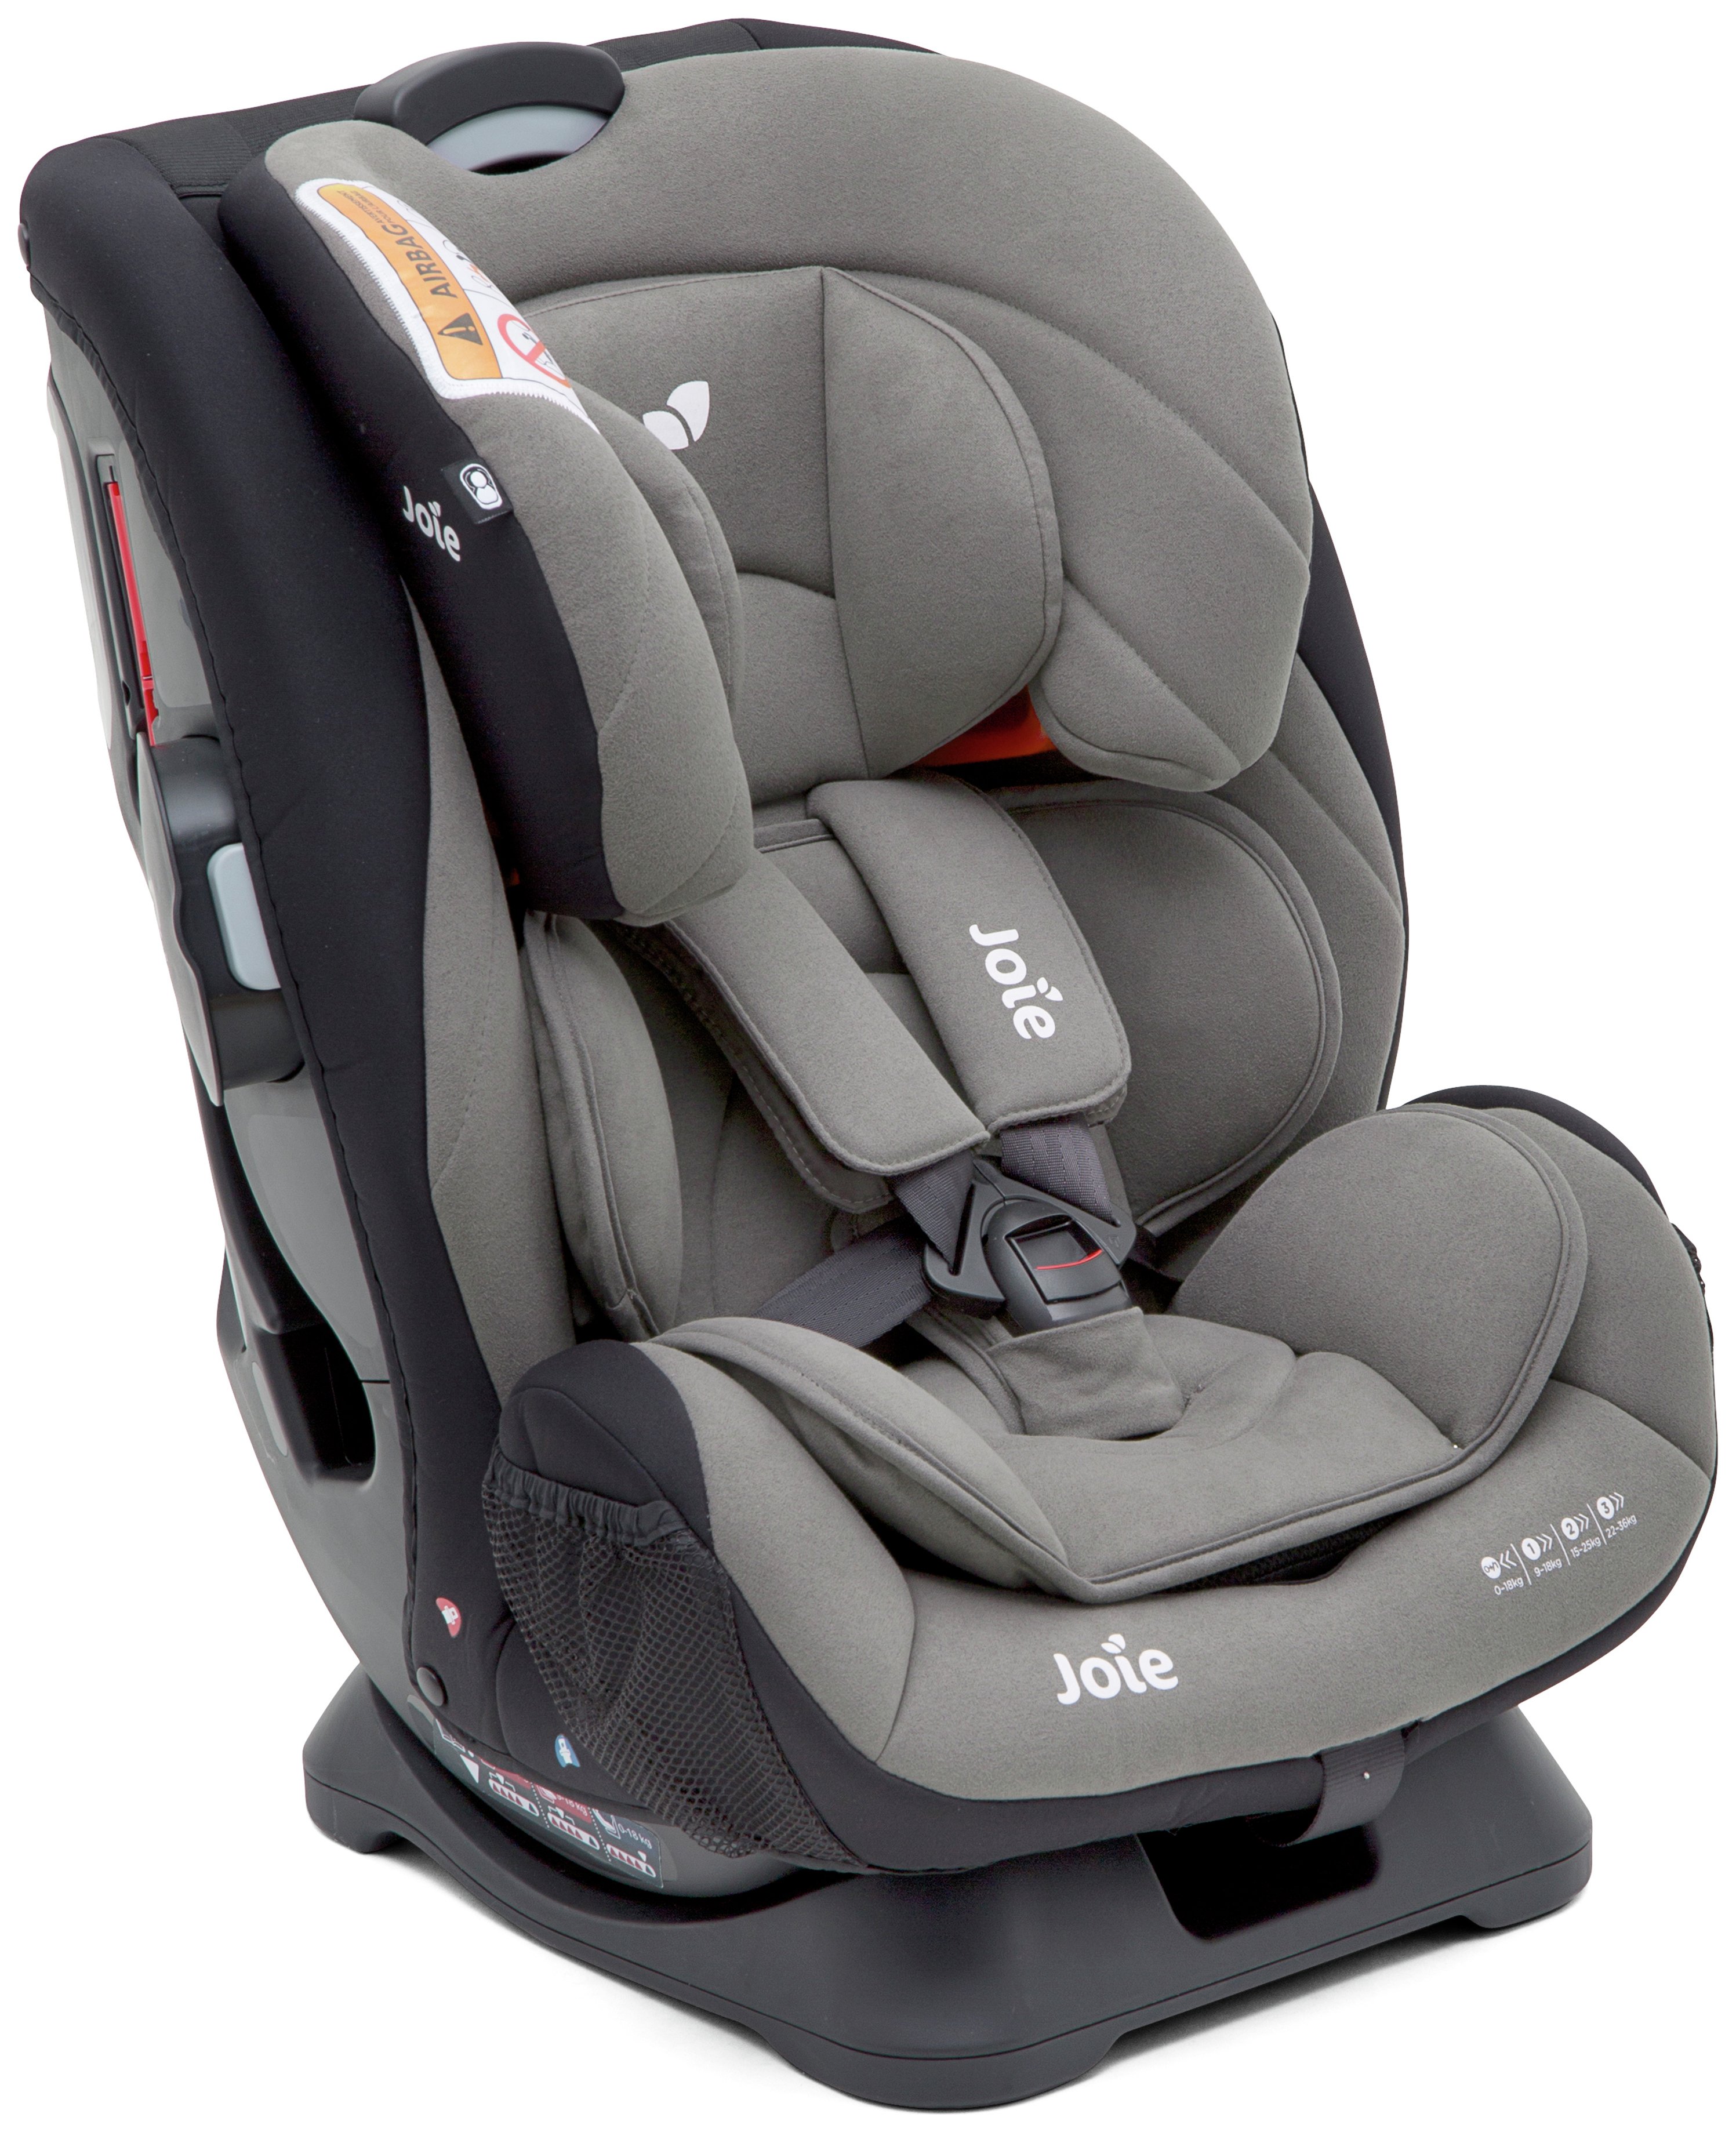 Joie Every Stage Group 0+/1/2/3 Car Seat Reviews